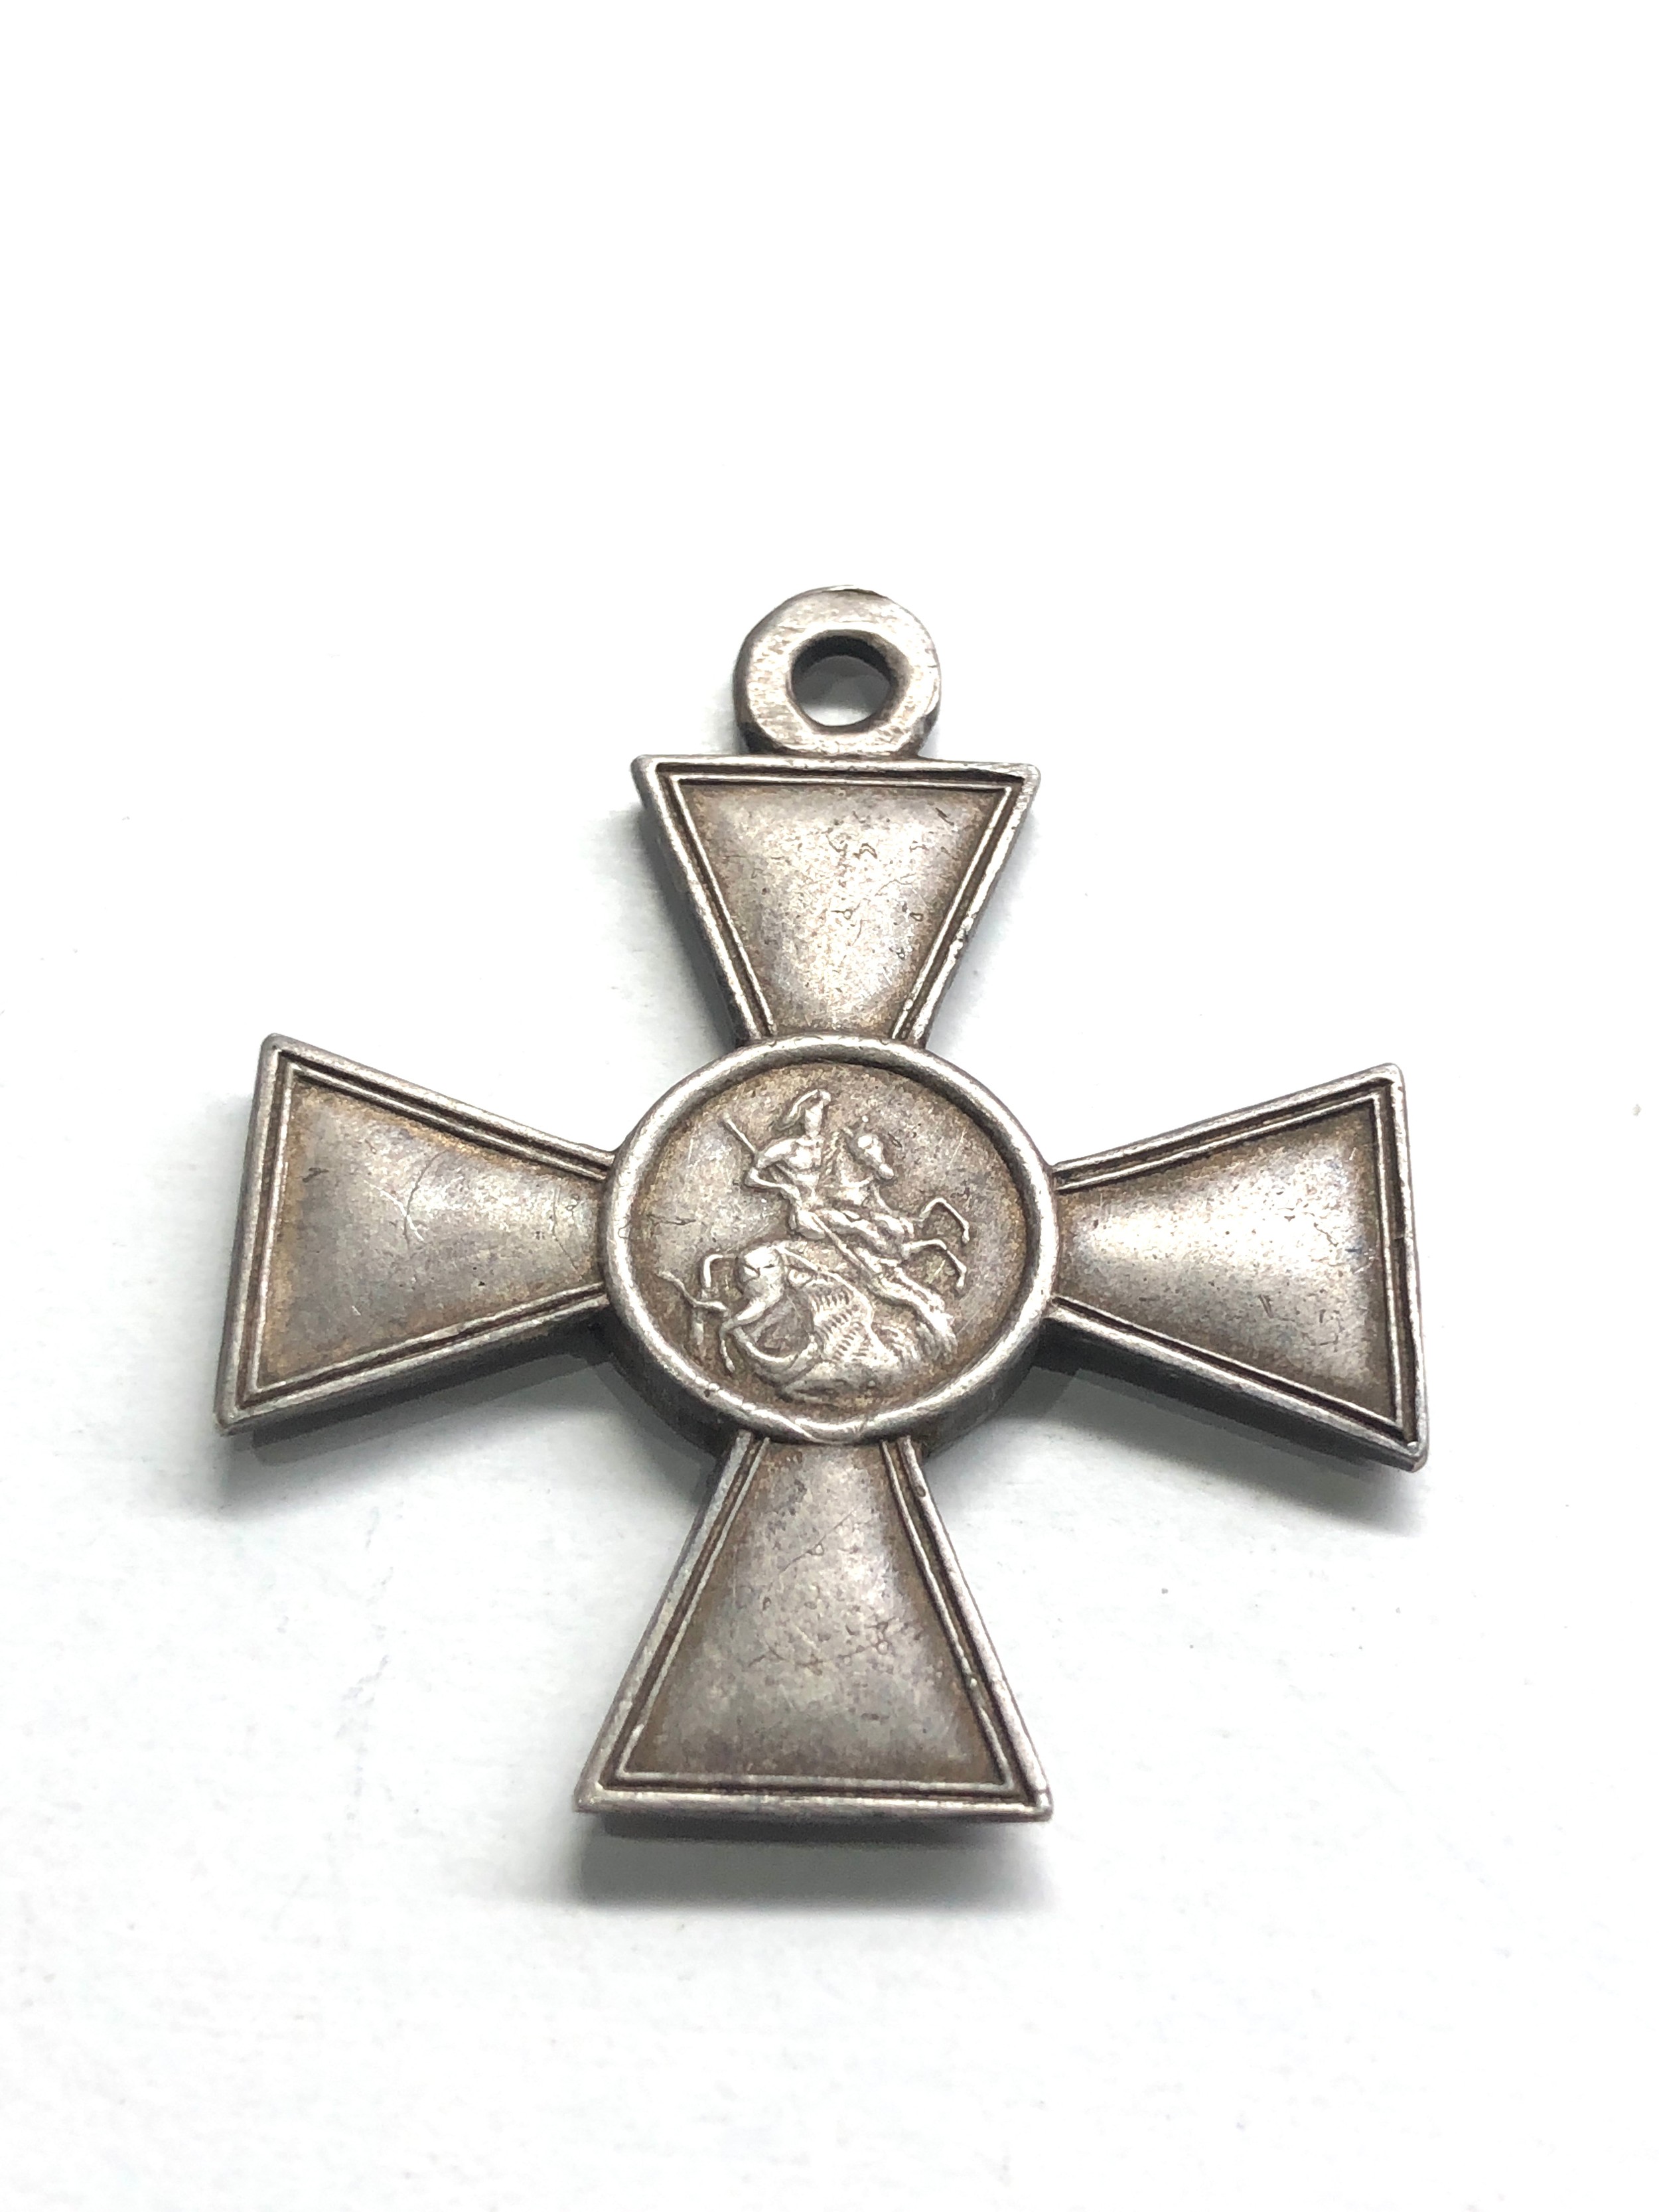 Antique silver medal - Image 2 of 2